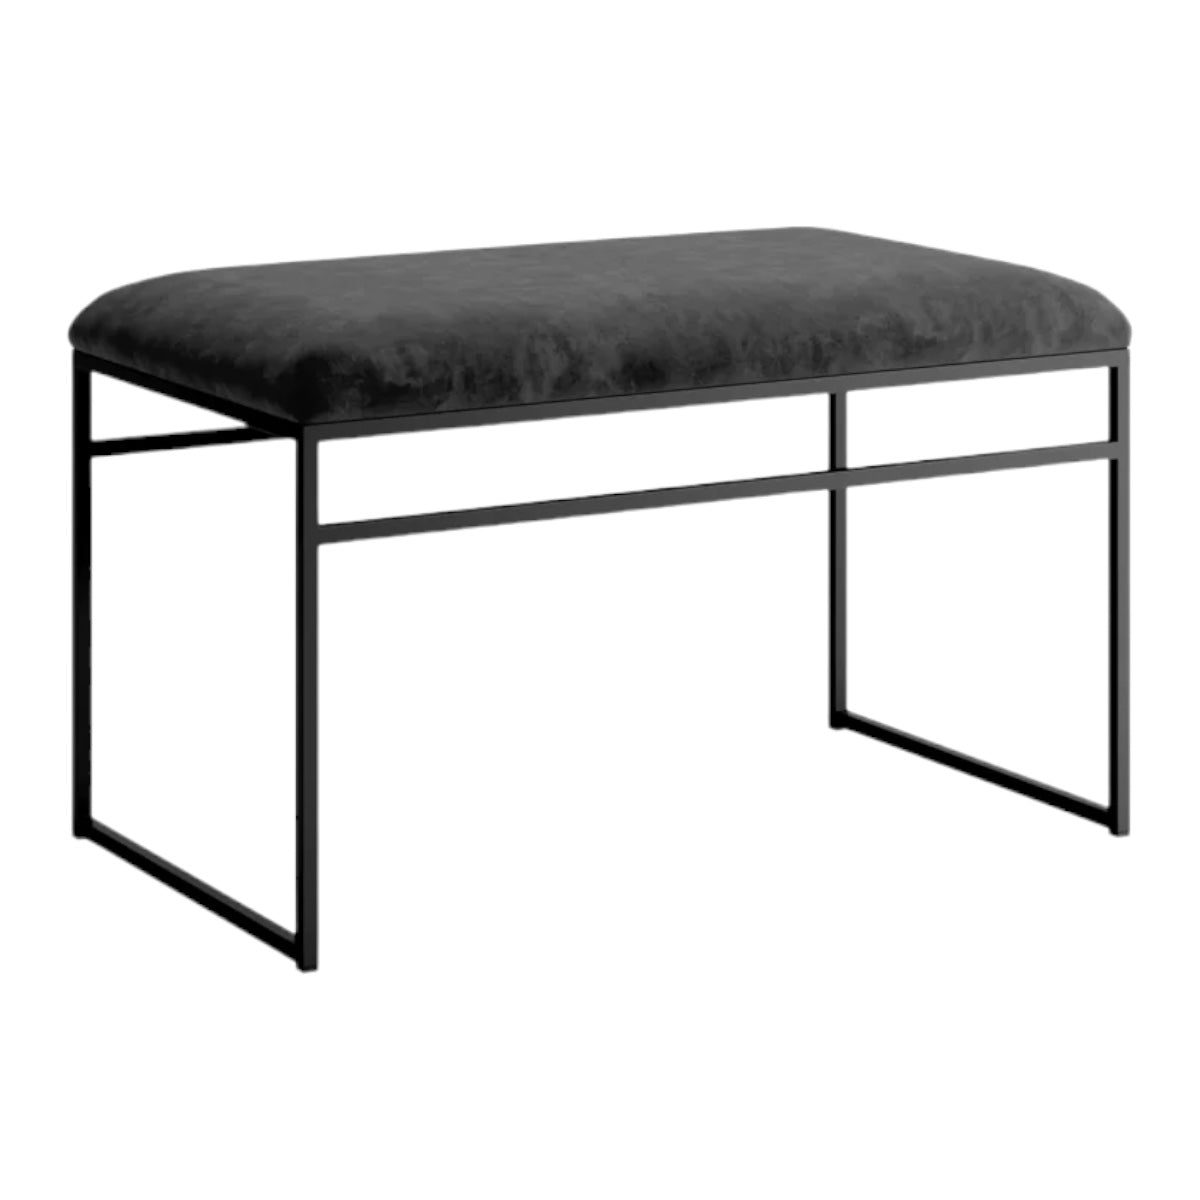 HAND CRAFTED SOHO METAL FRAME BLACK SUEDE BENCH